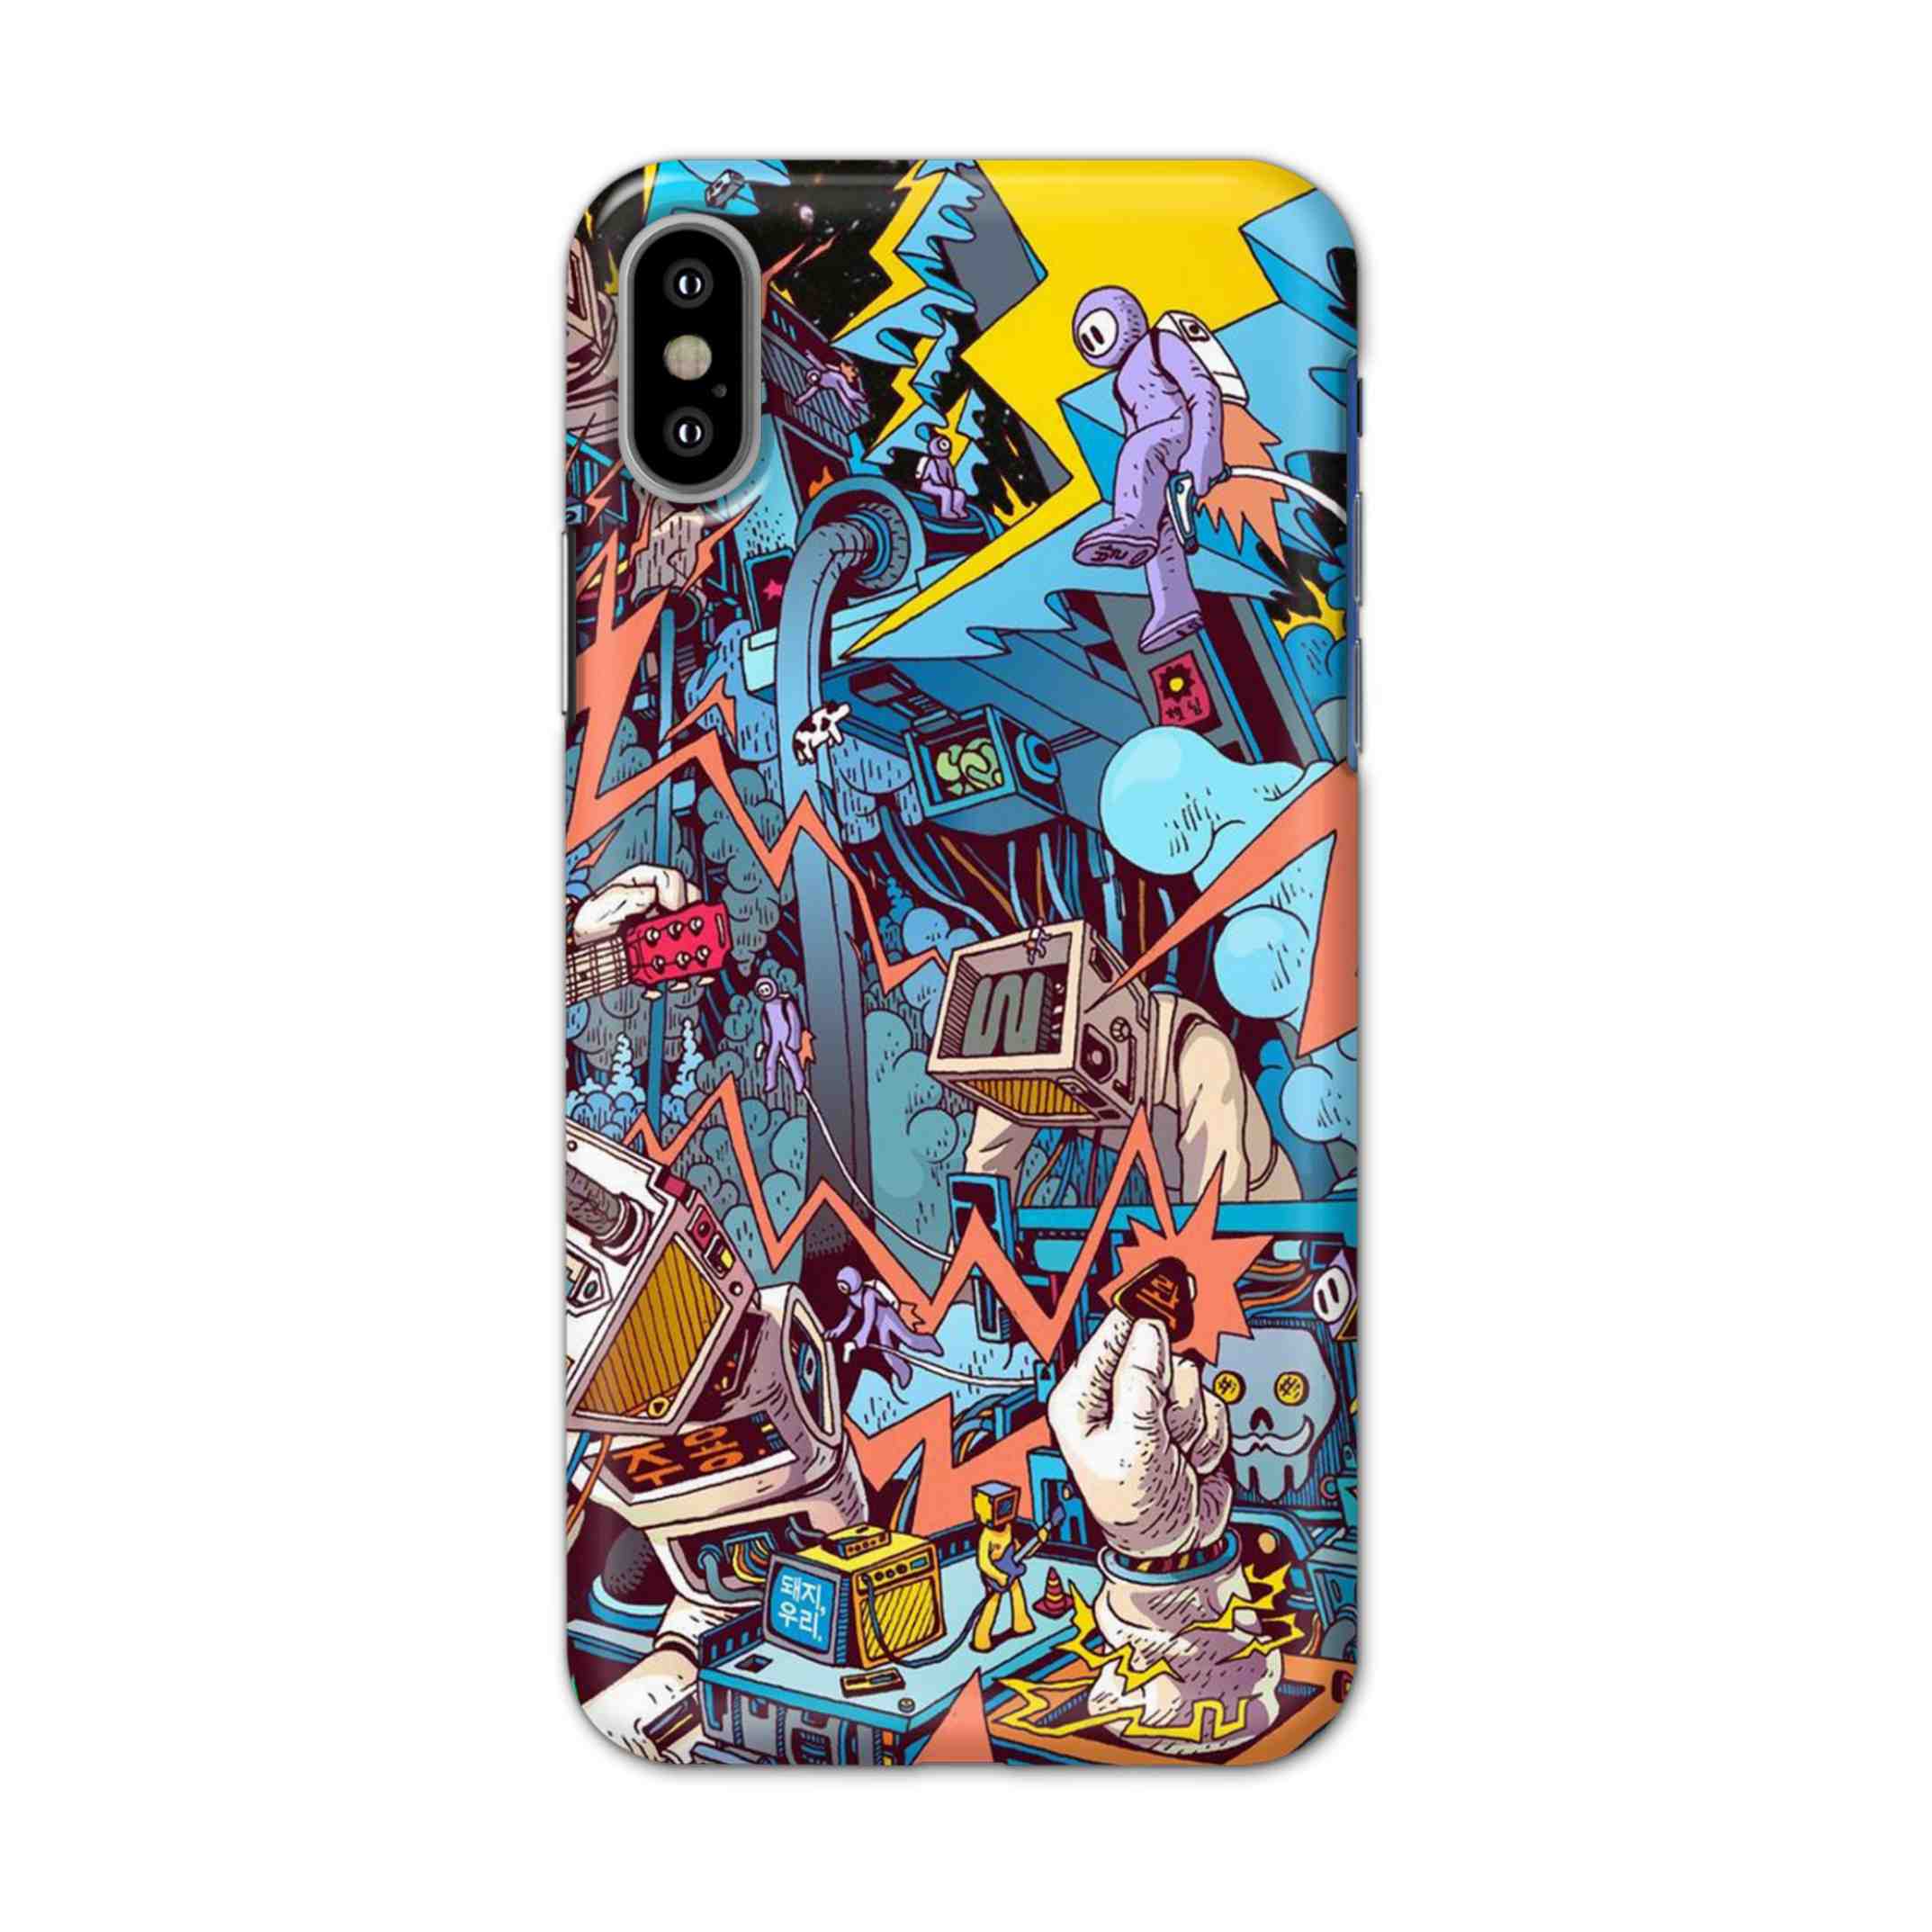 Buy Ofo Panic Hard Back Mobile Phone Case/Cover For iPhone X Online